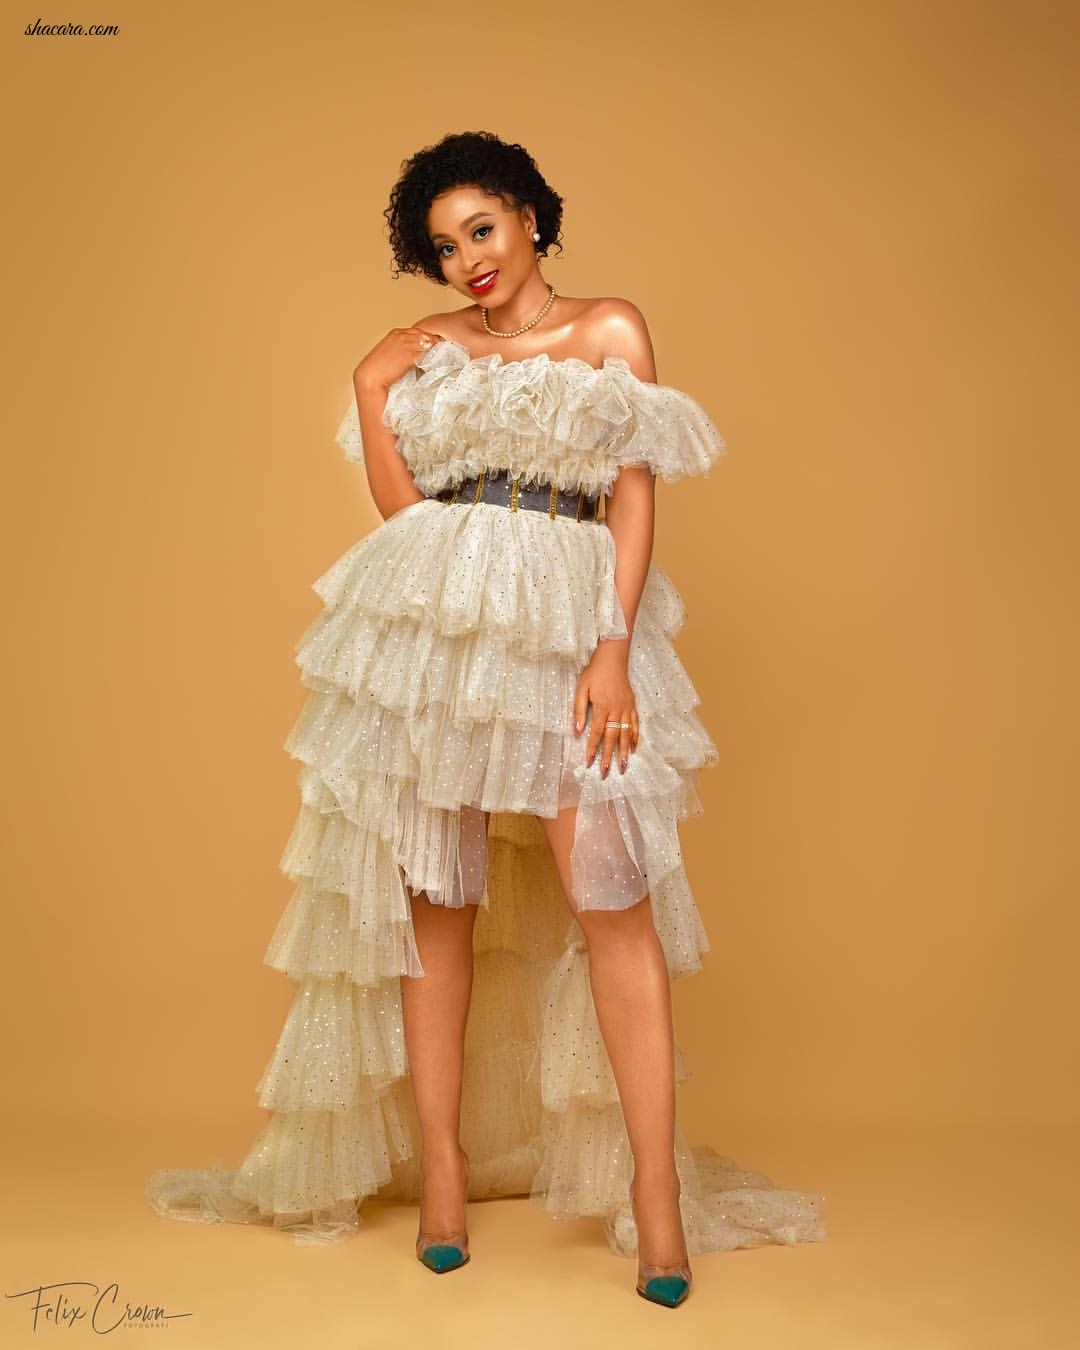 Mabel Makun Lives It Up In Style As She Celebrates Birthday With Drop-Dead Gorgeous Photos